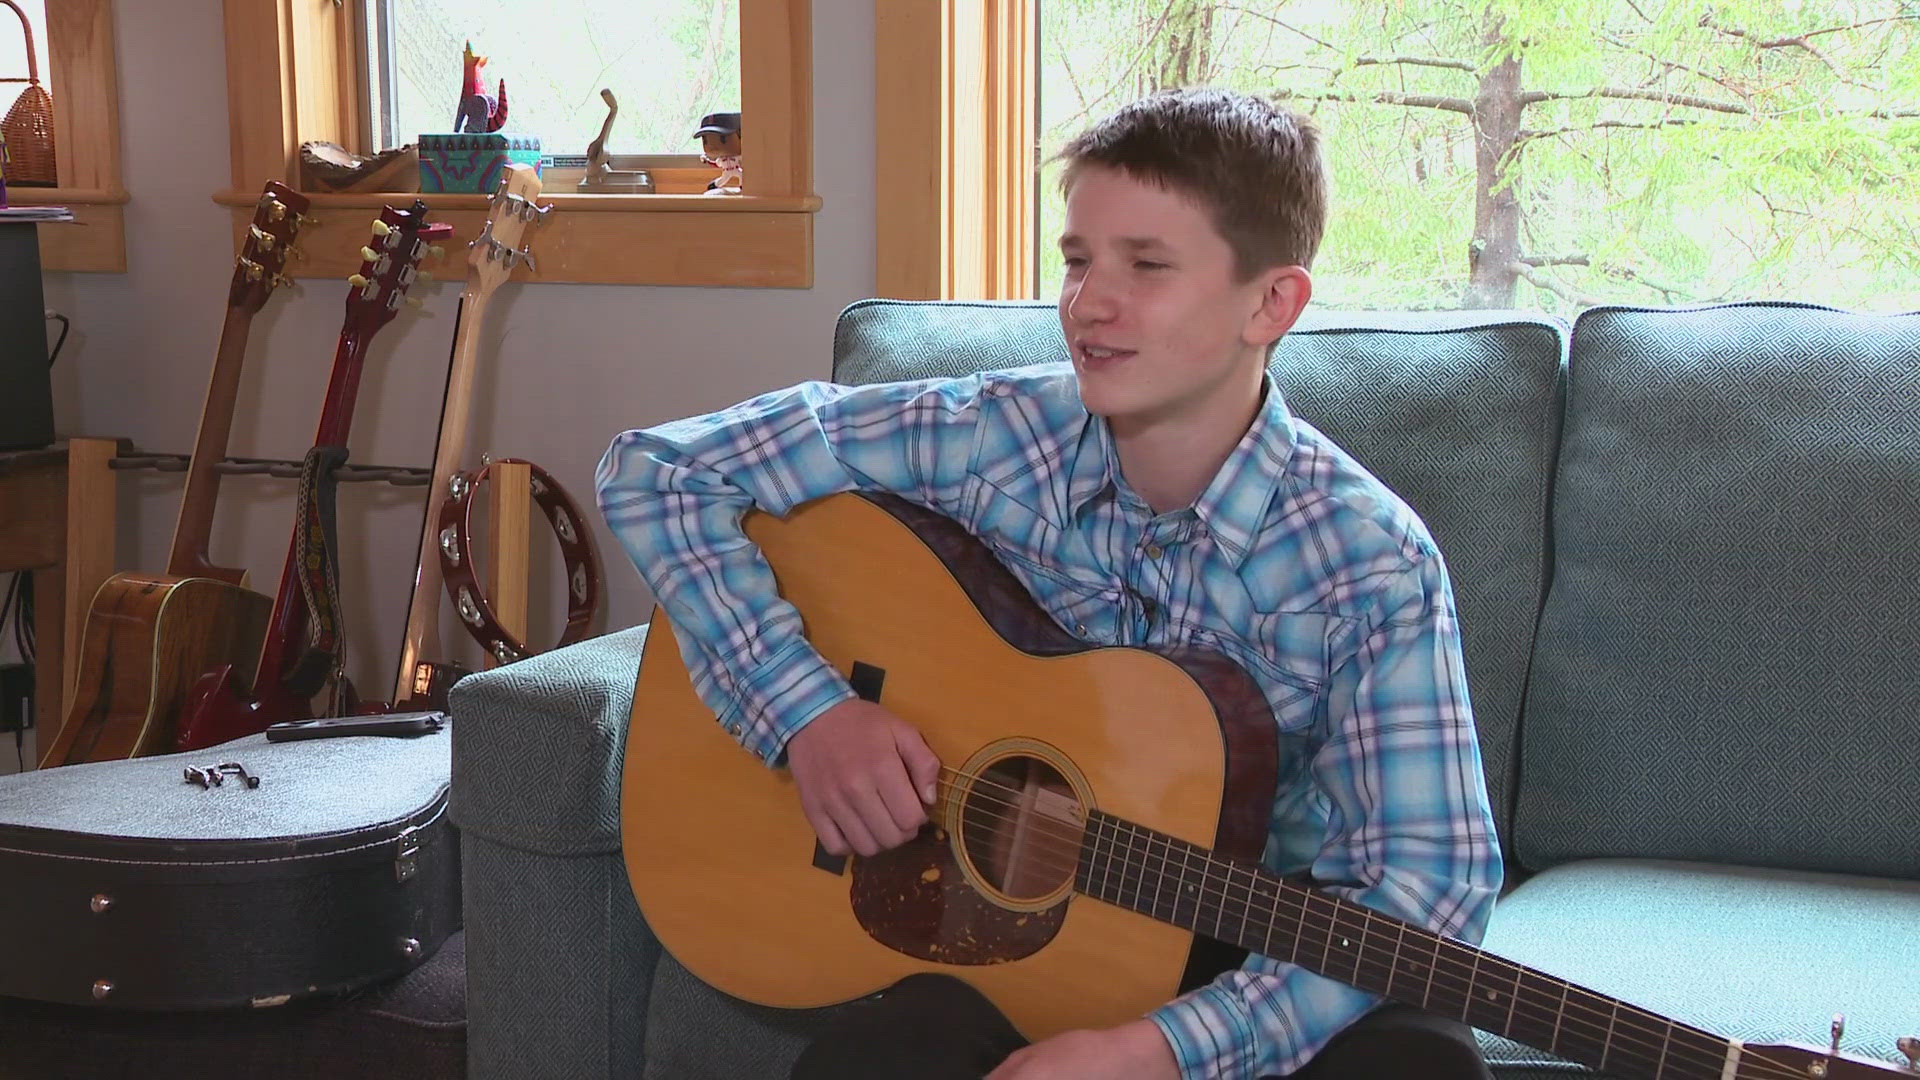 Jack Marston, 14, is this year’s winner of the annual Maine High School Student Guitar Competition.